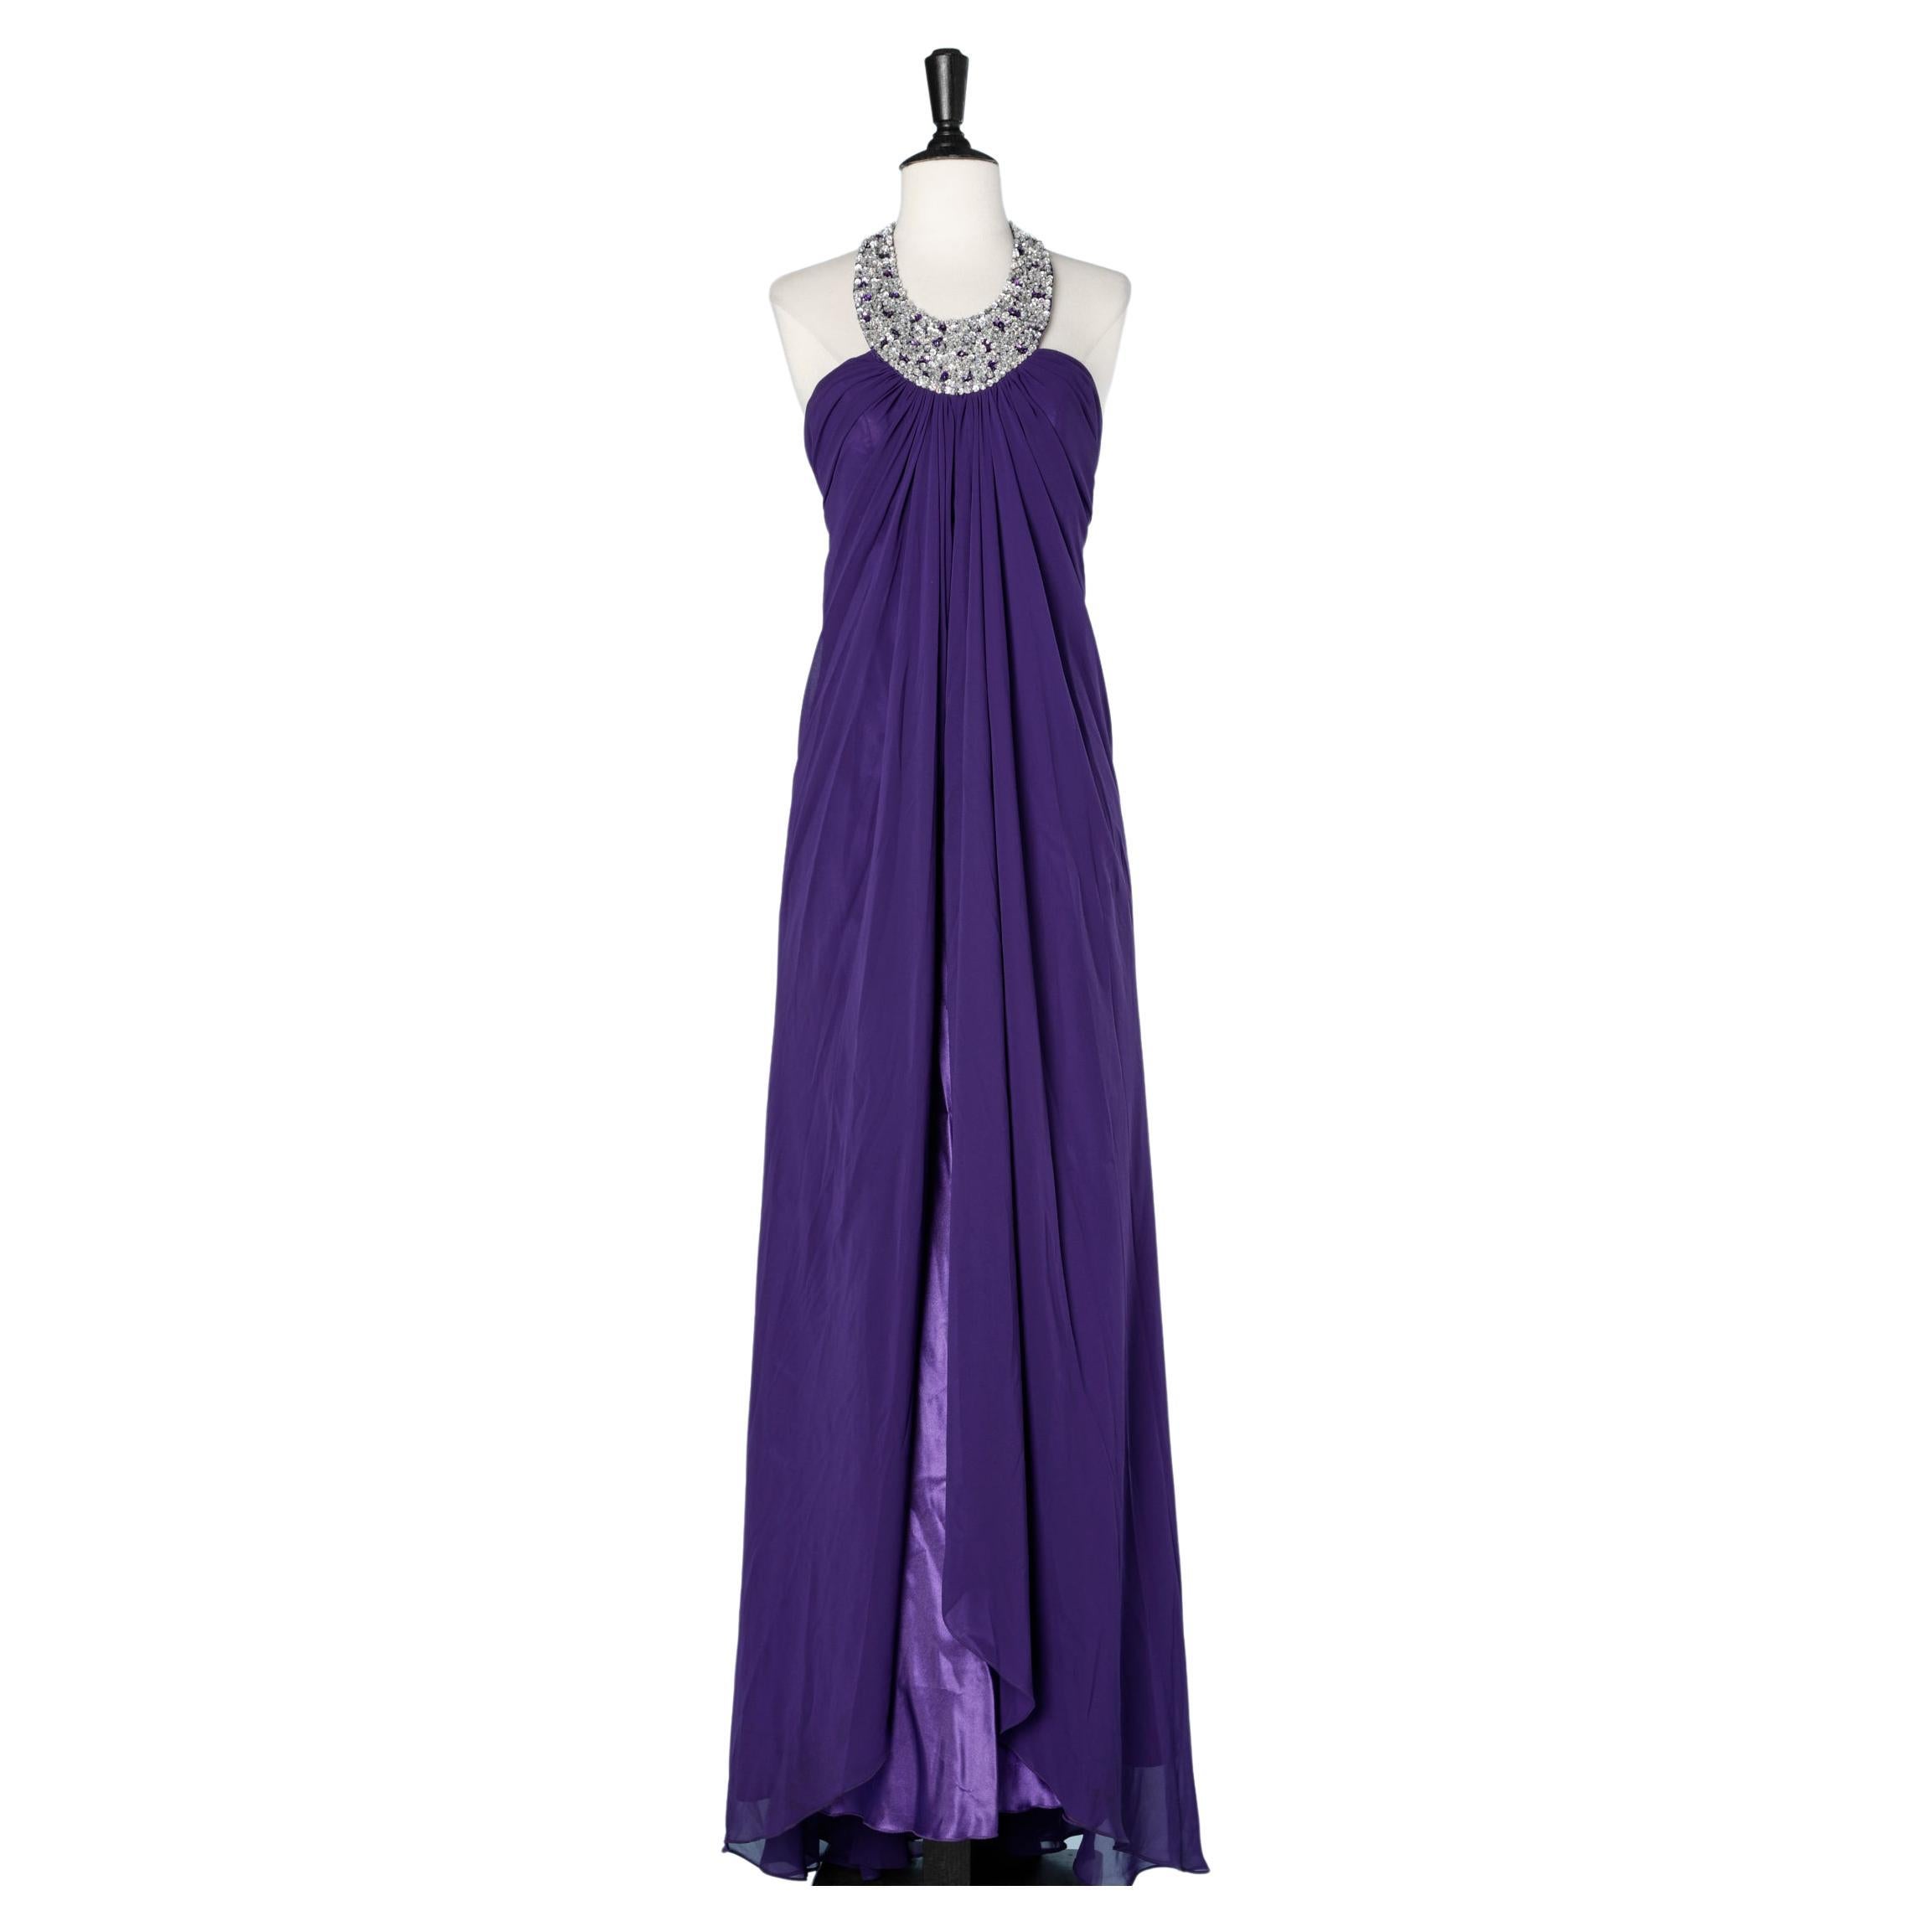 Long evening gown in purple chiffon and satin with a sequin neckless collar